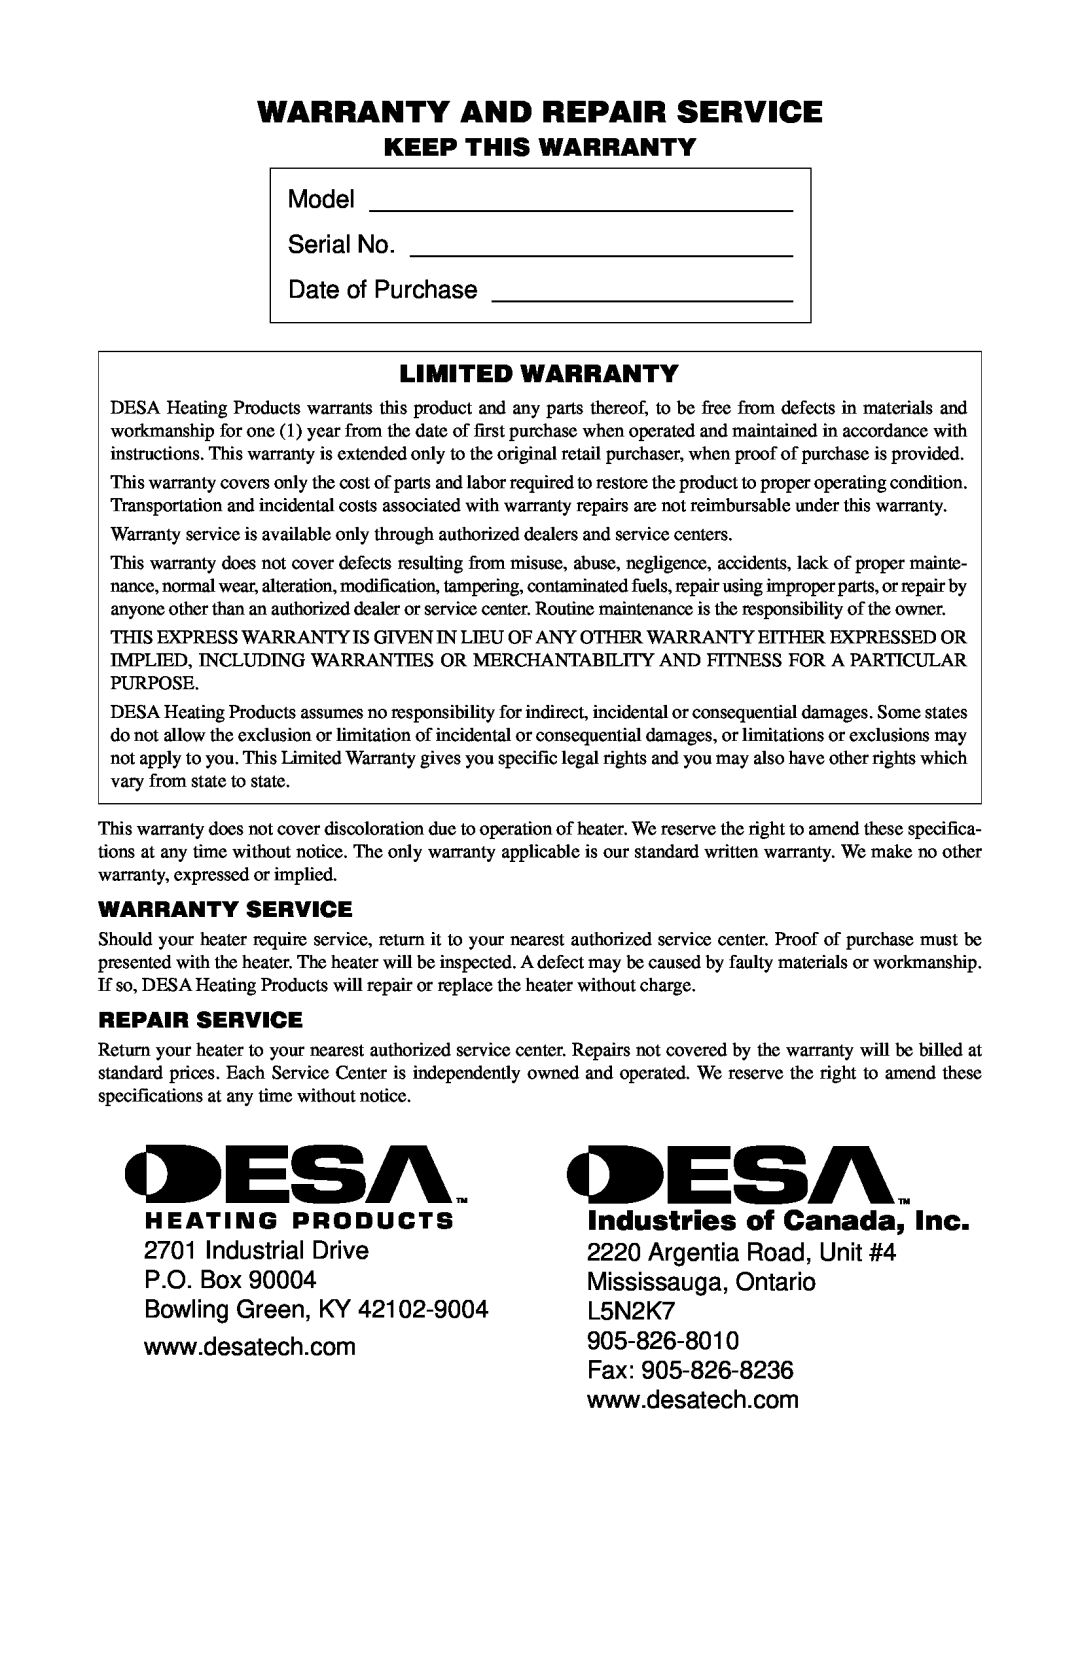 Desa CANADIAN PROPANE CONSTRUCTION CONVECTION HEATER owner manual Warranty And Repair Service, Industries of Canada, Inc 